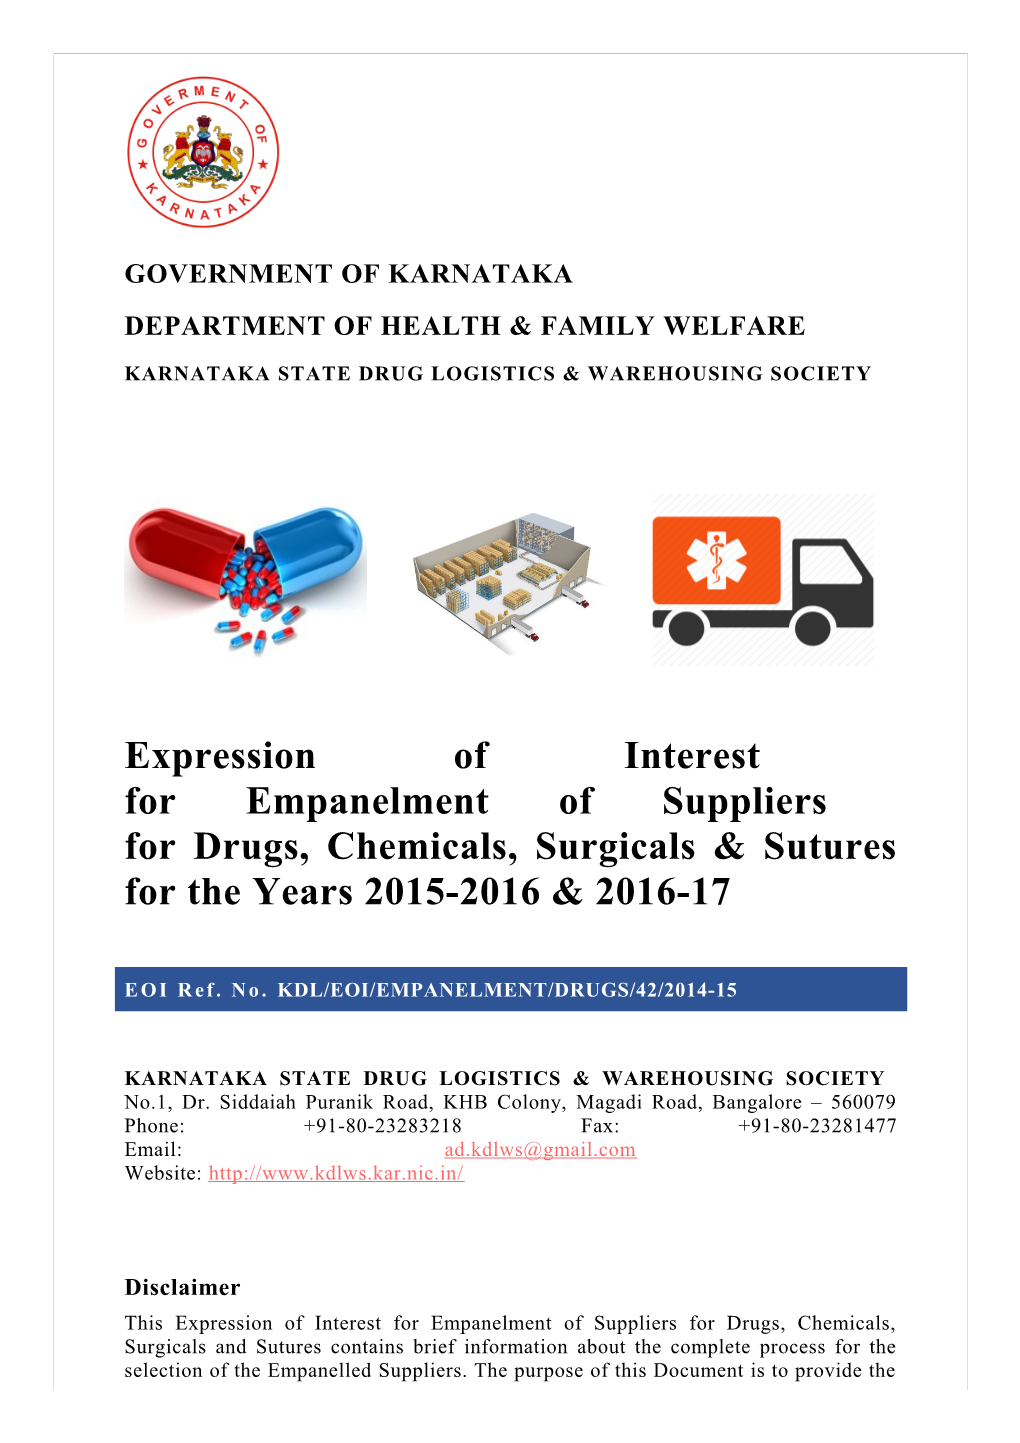 Expression of Interest for Empanelment of Suppliers for Drugs, Chemicals, Surgicals & Sutures